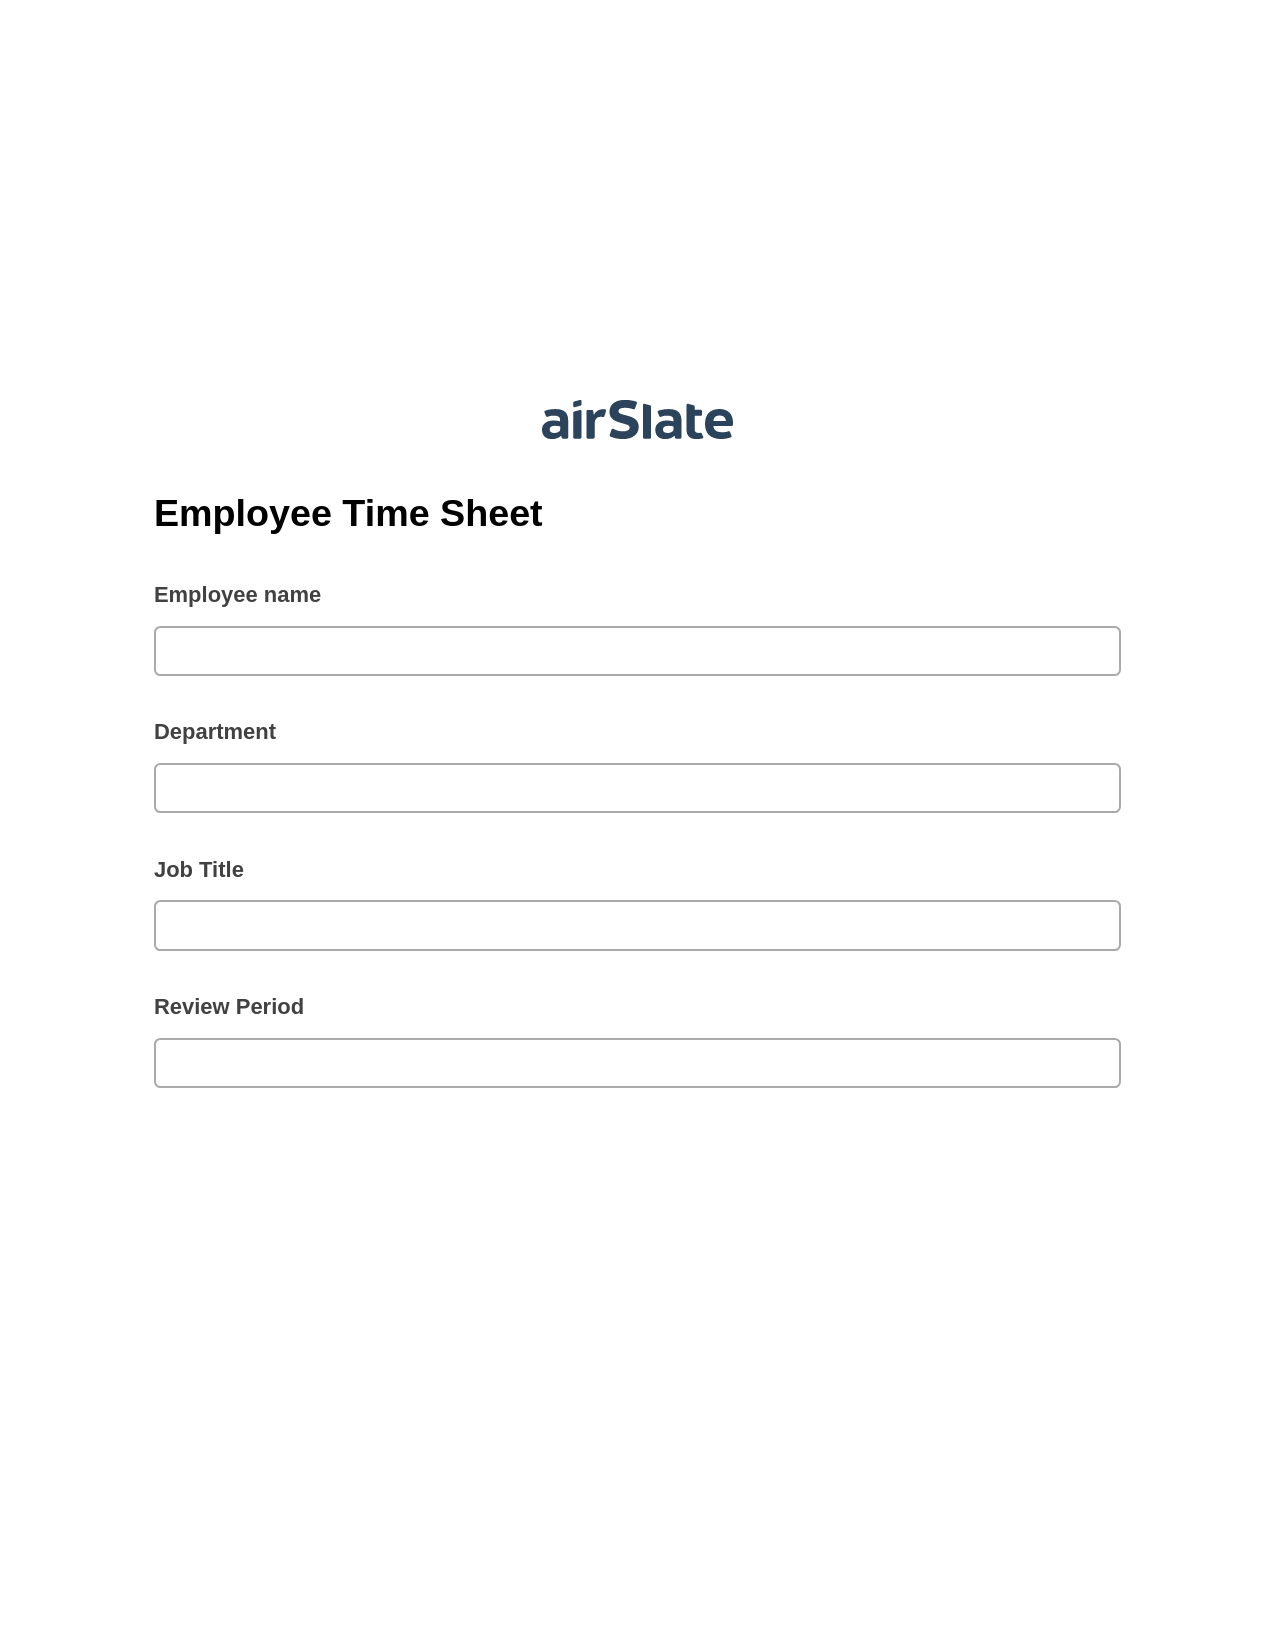 Multirole Employee Time Sheet Pre-fill from CSV File Bot, Create Salesforce Records Bot, Archive to SharePoint Folder Bot